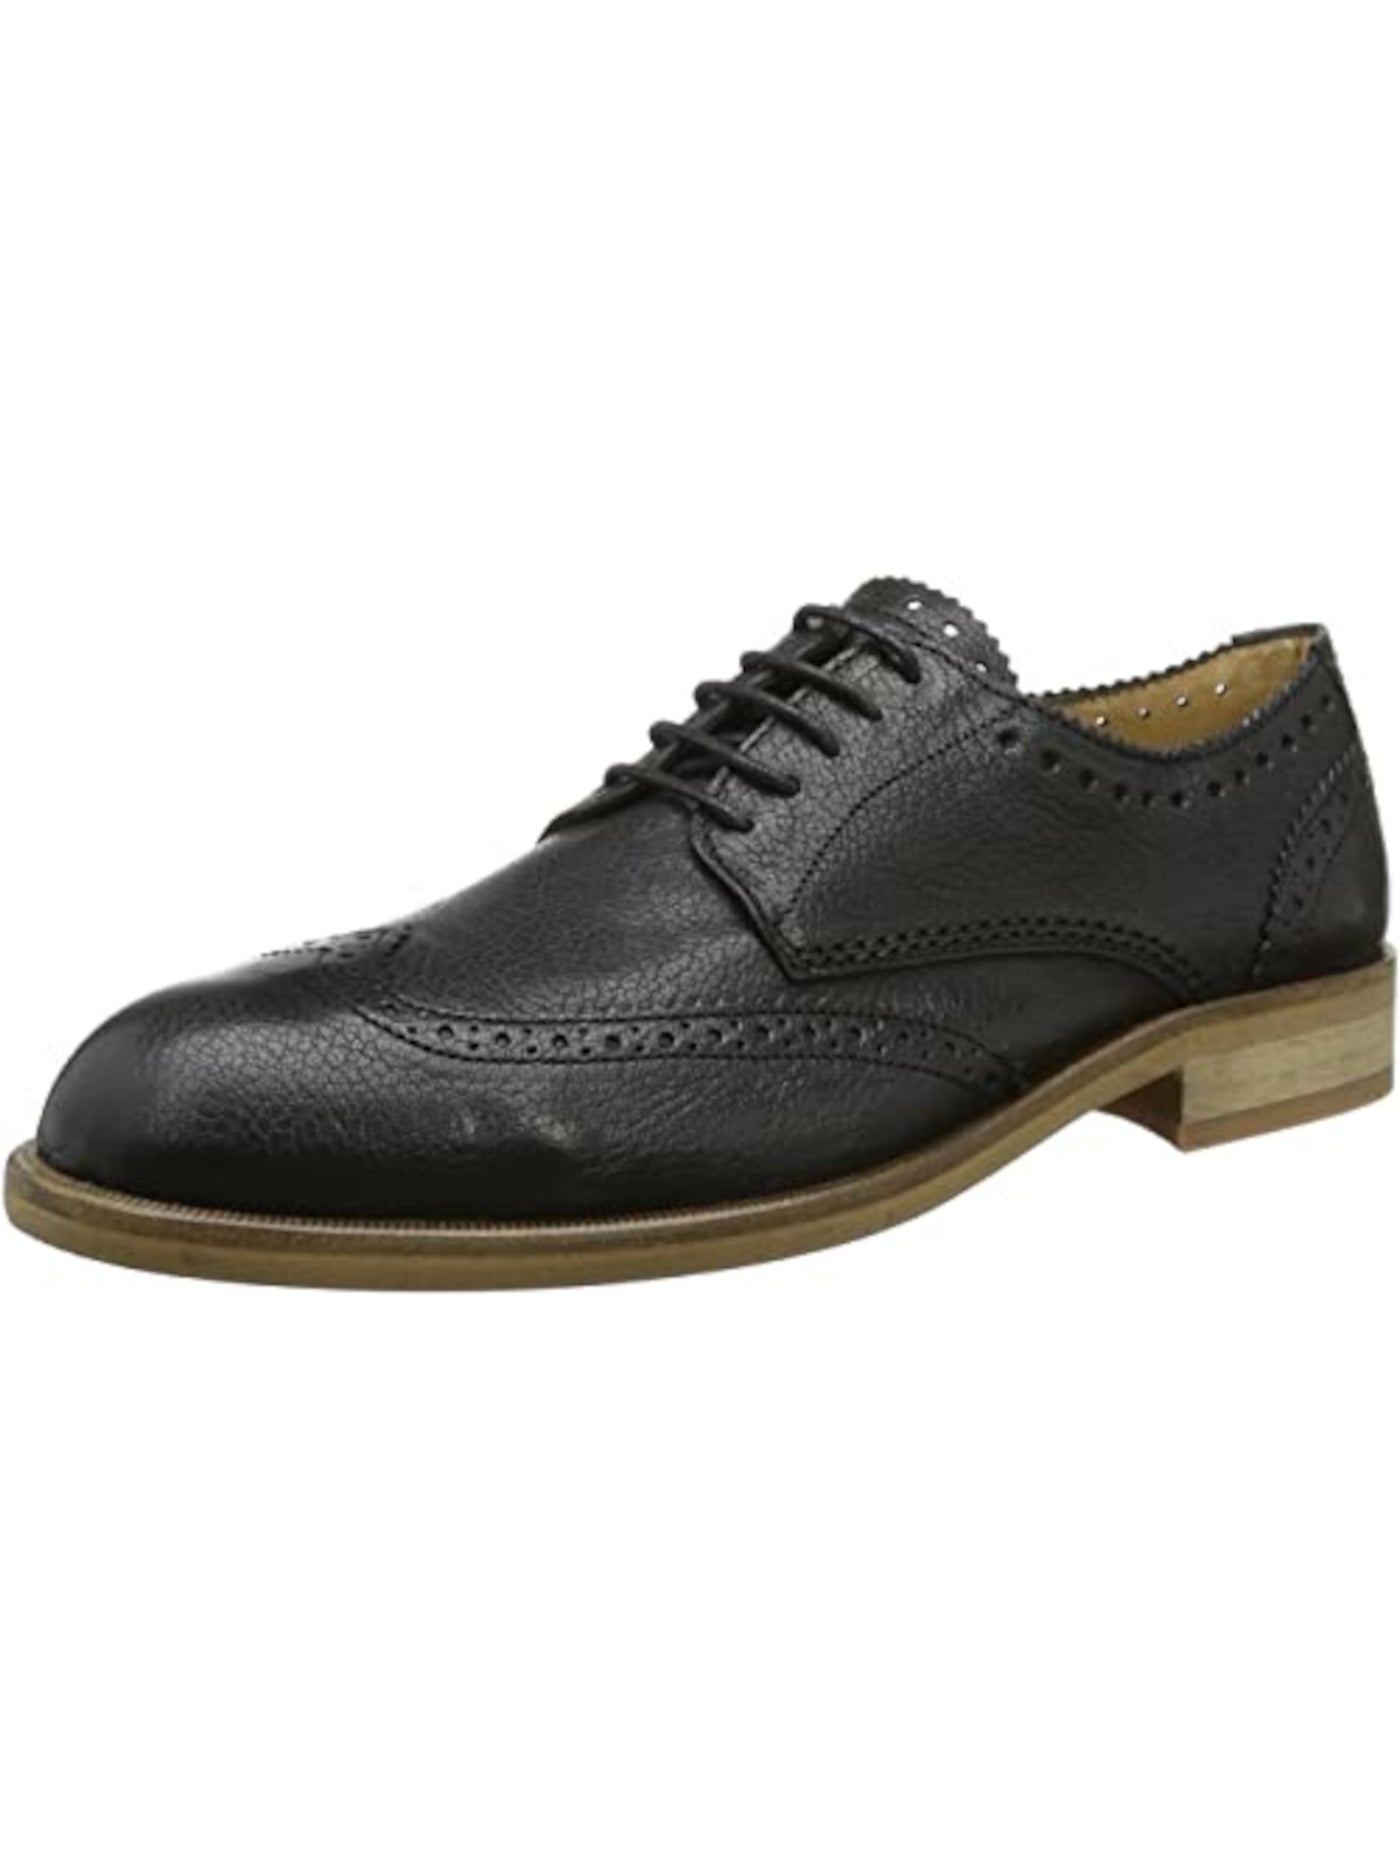 HUDSON Mens Black Padded Wingtip Perforated Payne Round Toe Block Heel Lace-Up Leather Dress Oxford Shoes 42